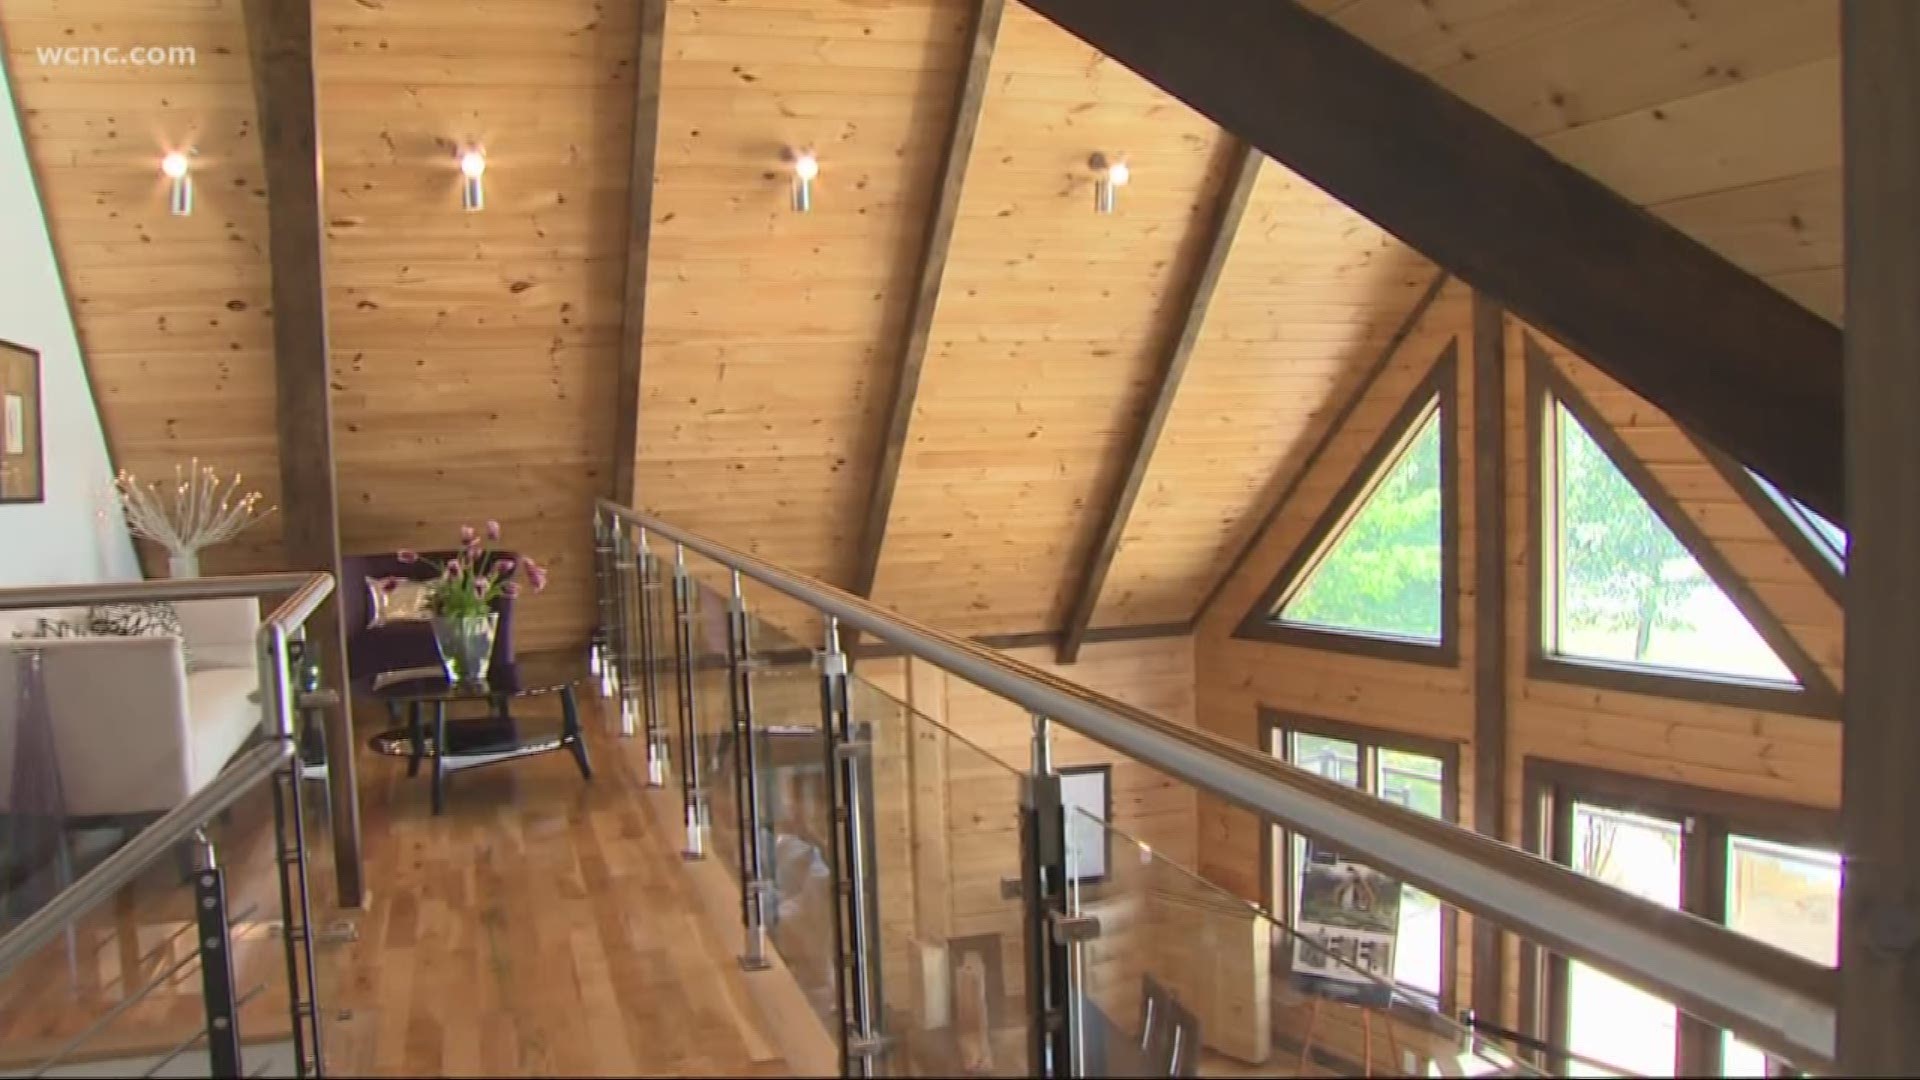 Timber Block Homes builds gorgeous, energy efficient homes virtually anywhere you want. TV host, Mike Holmes, explains why the houses are so spectacular.